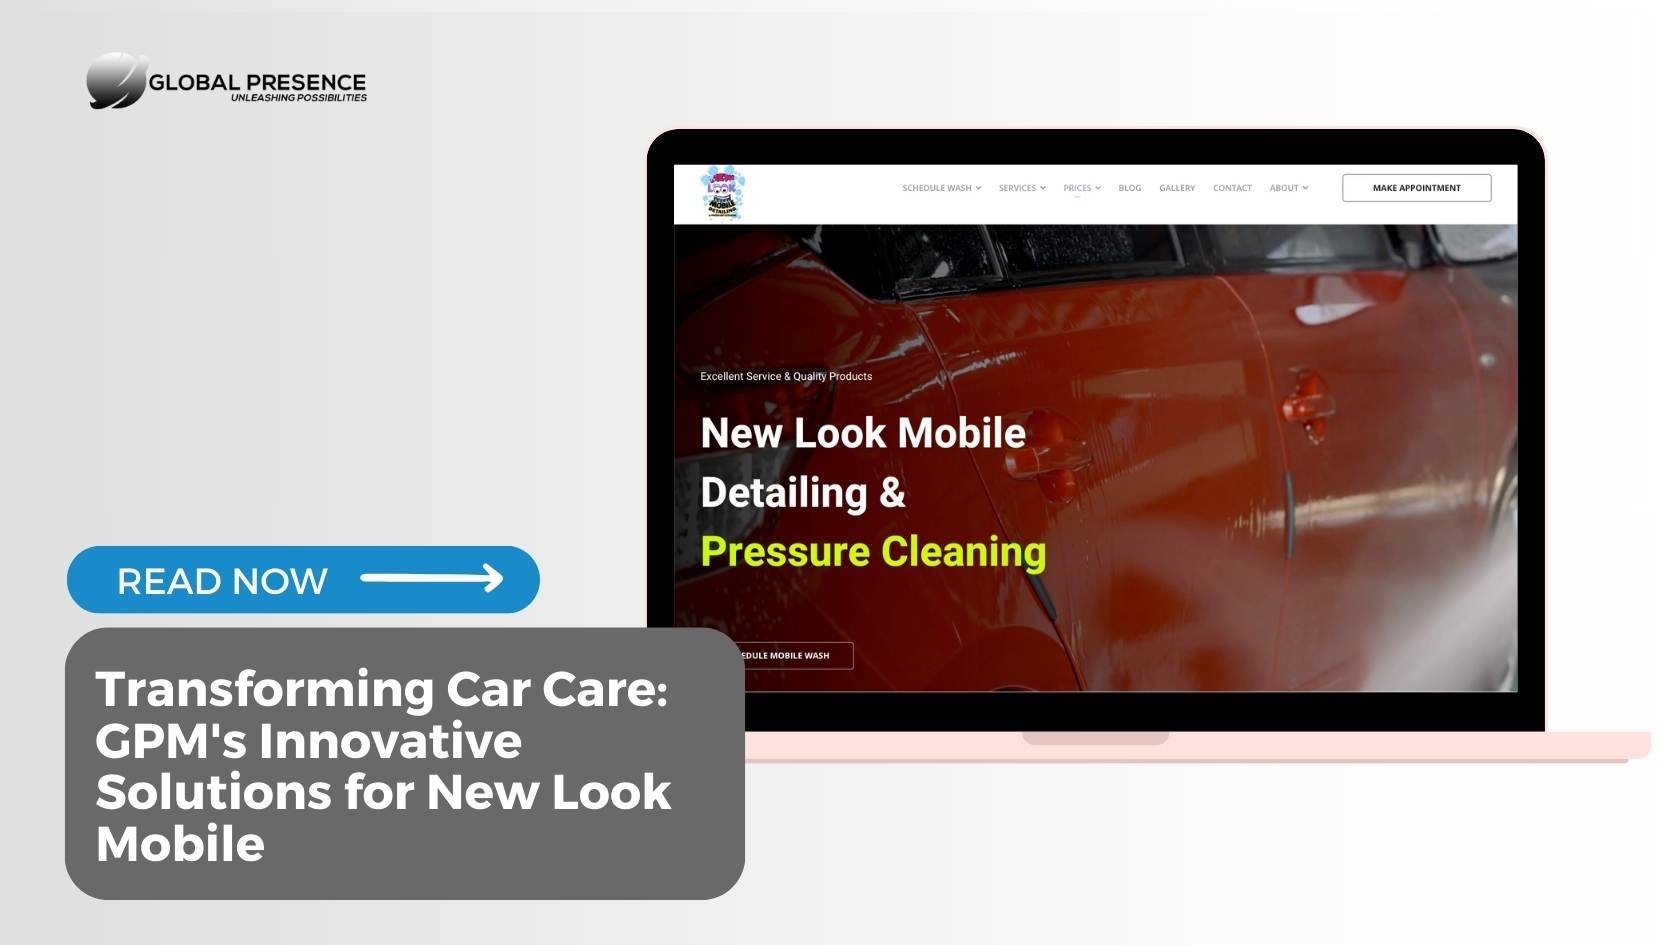 Transforming Car Care: GPM's Innovative Solutions for New Look Mobile